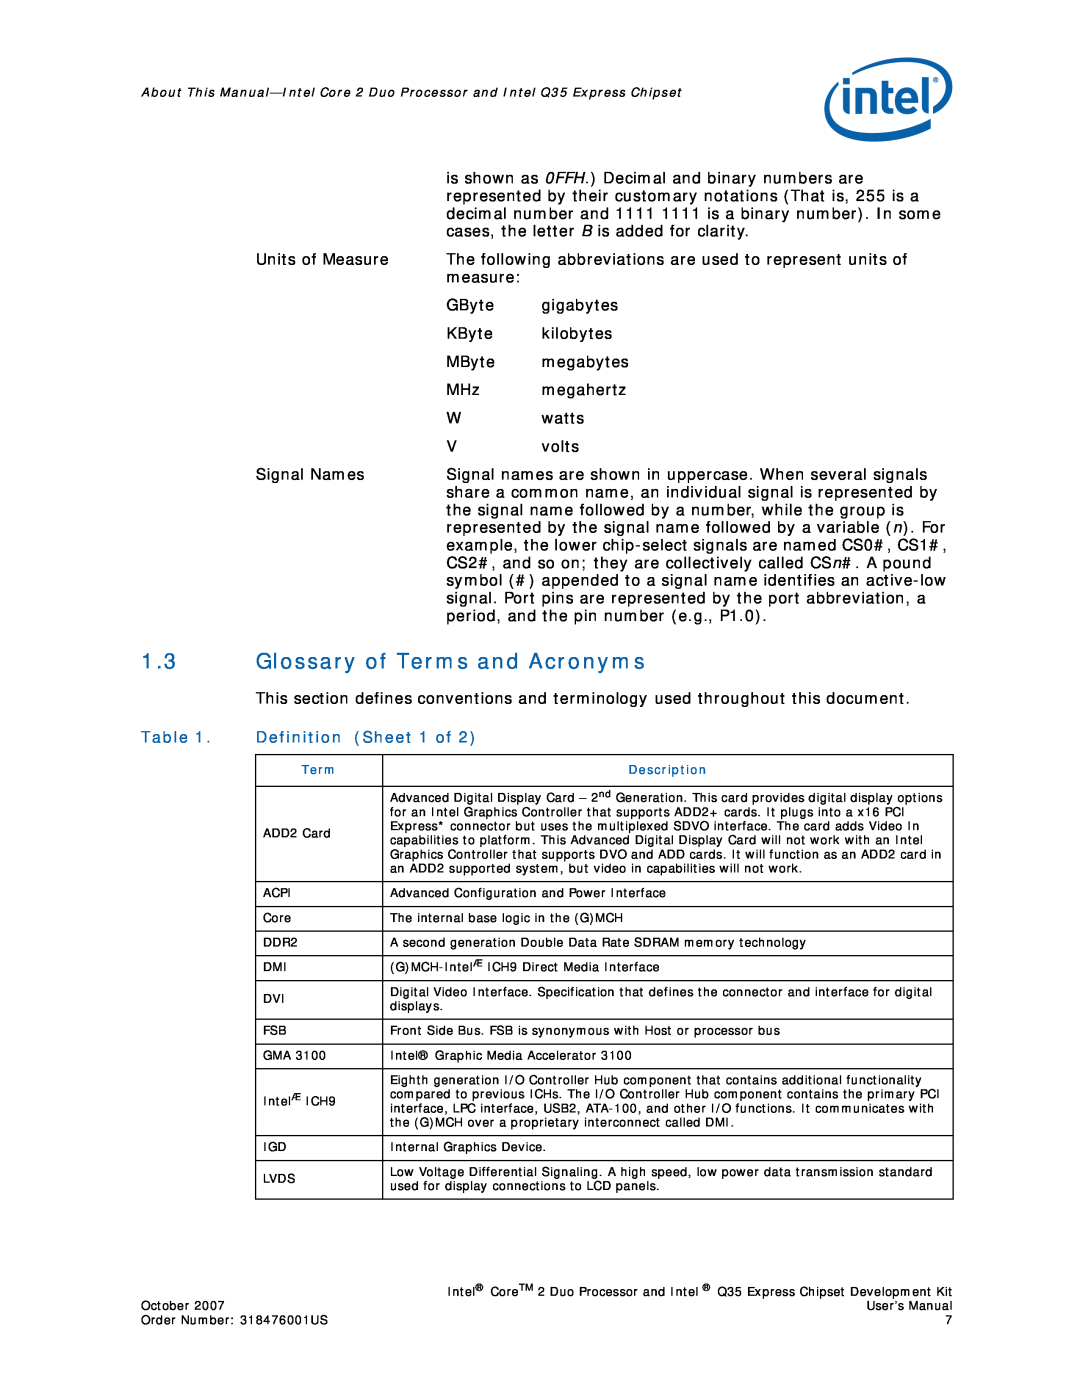 Intel Q35 Express, Core 2 Duo user manual Glossary of Terms and Acronyms, Definition, Sheet 1 of 